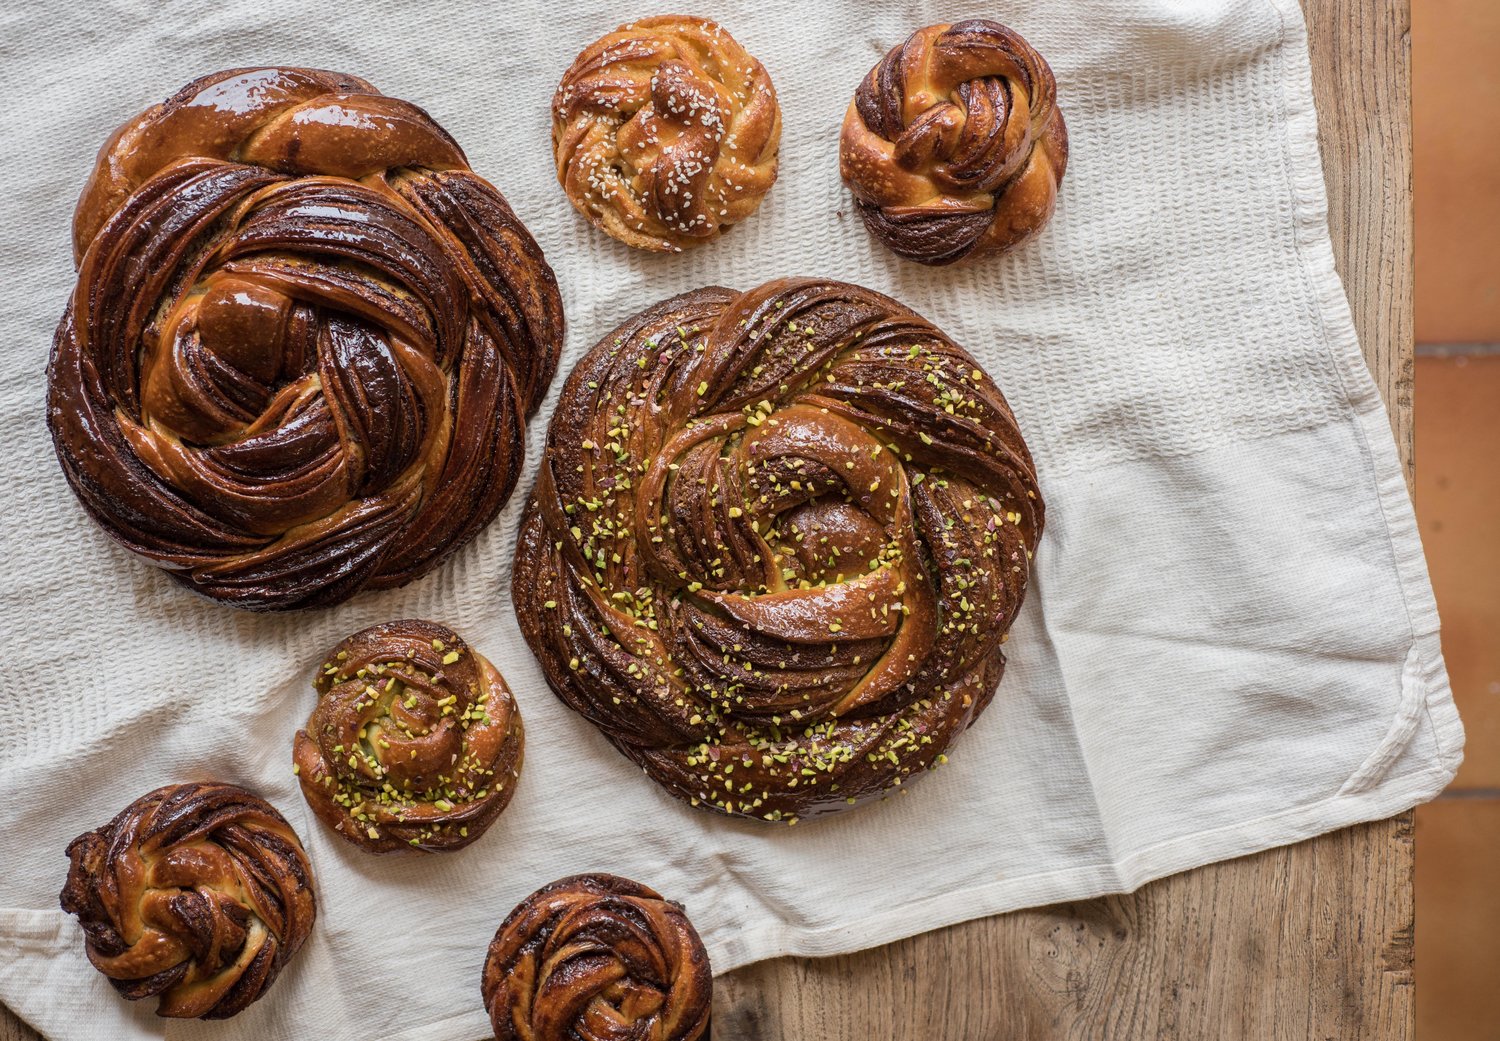 Some of the delicacies from Babka Zana, which had just opened before the pandemic hit.